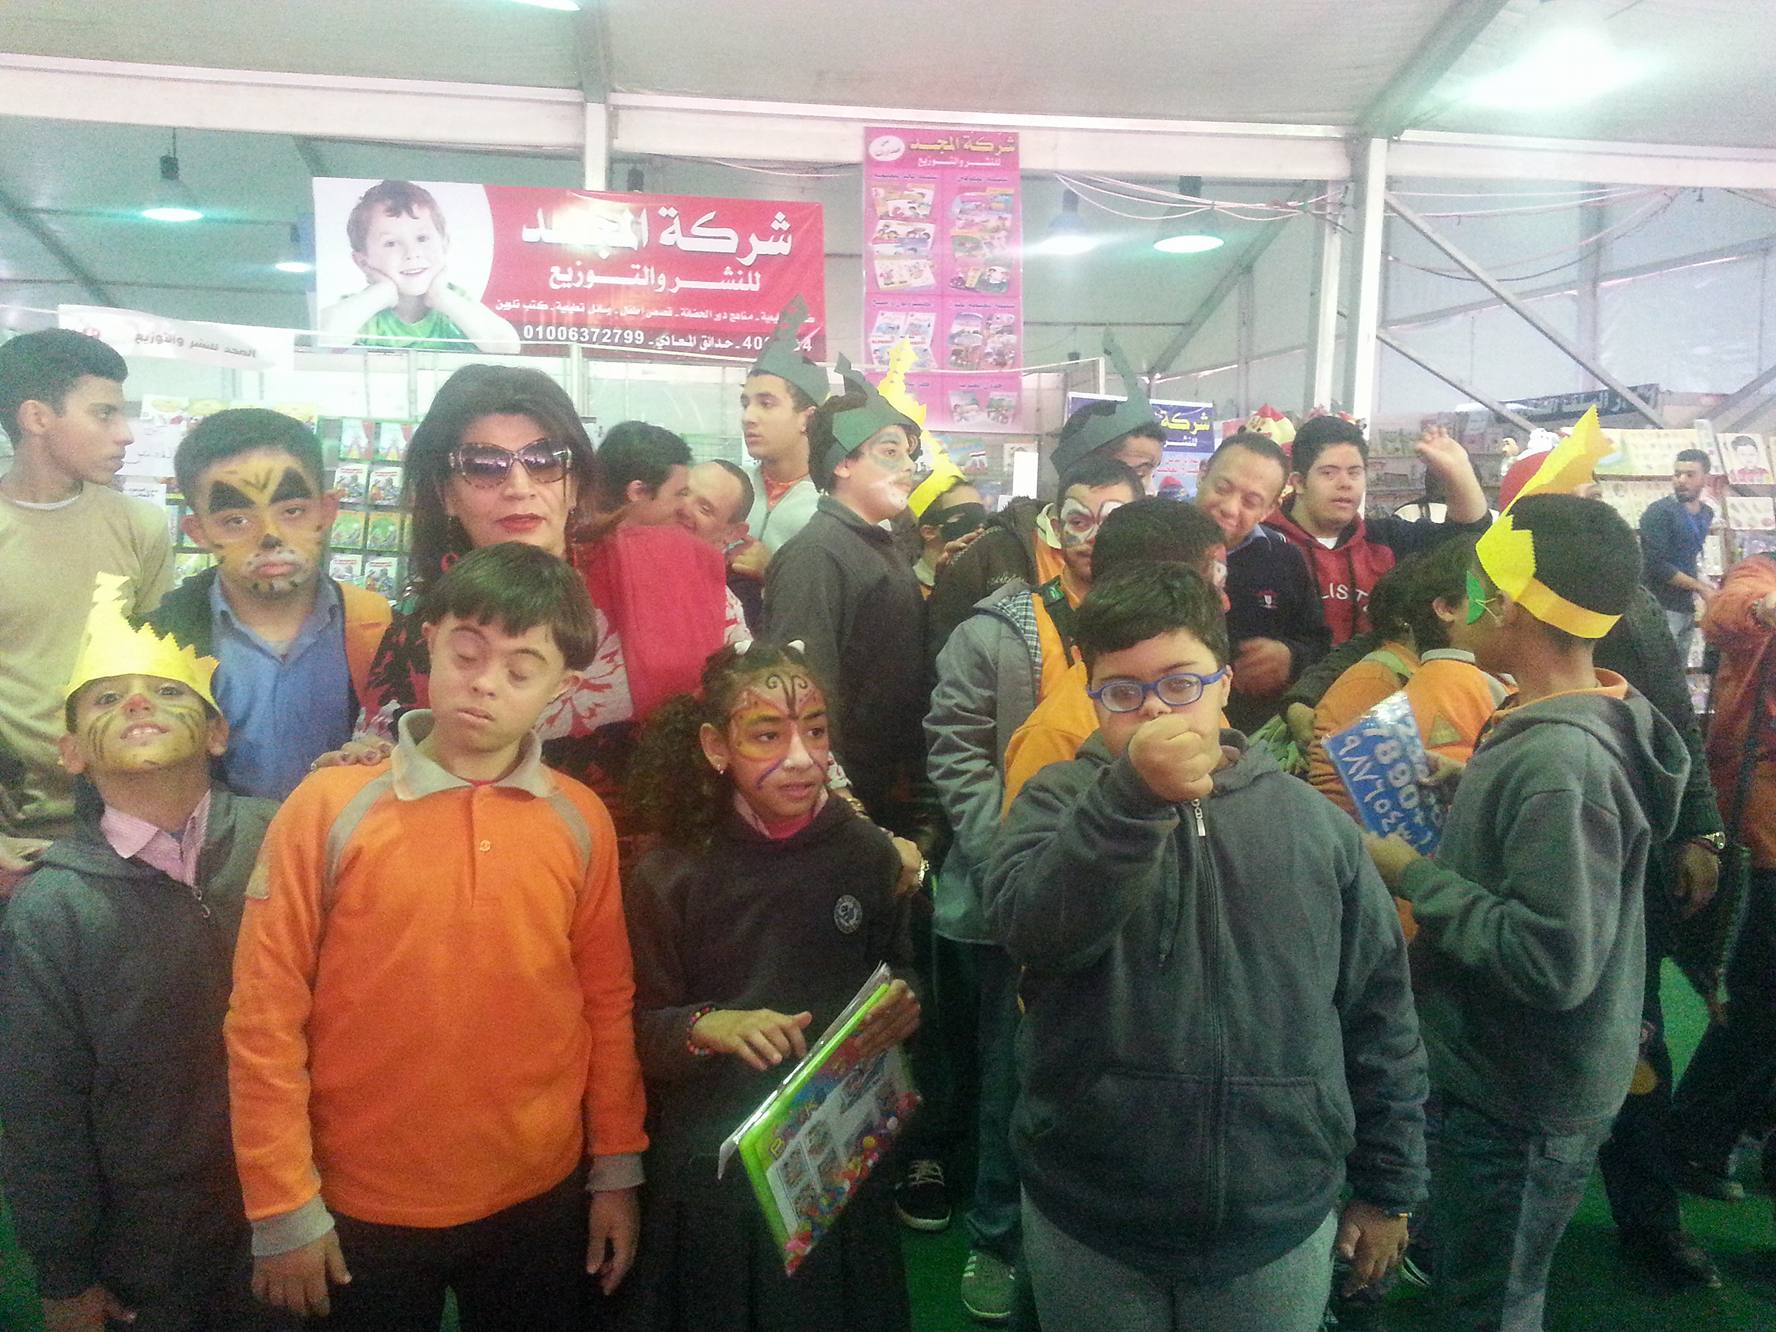 Students from Zeitoun Center for Children with Special Needs visit Cairo International Book Fair